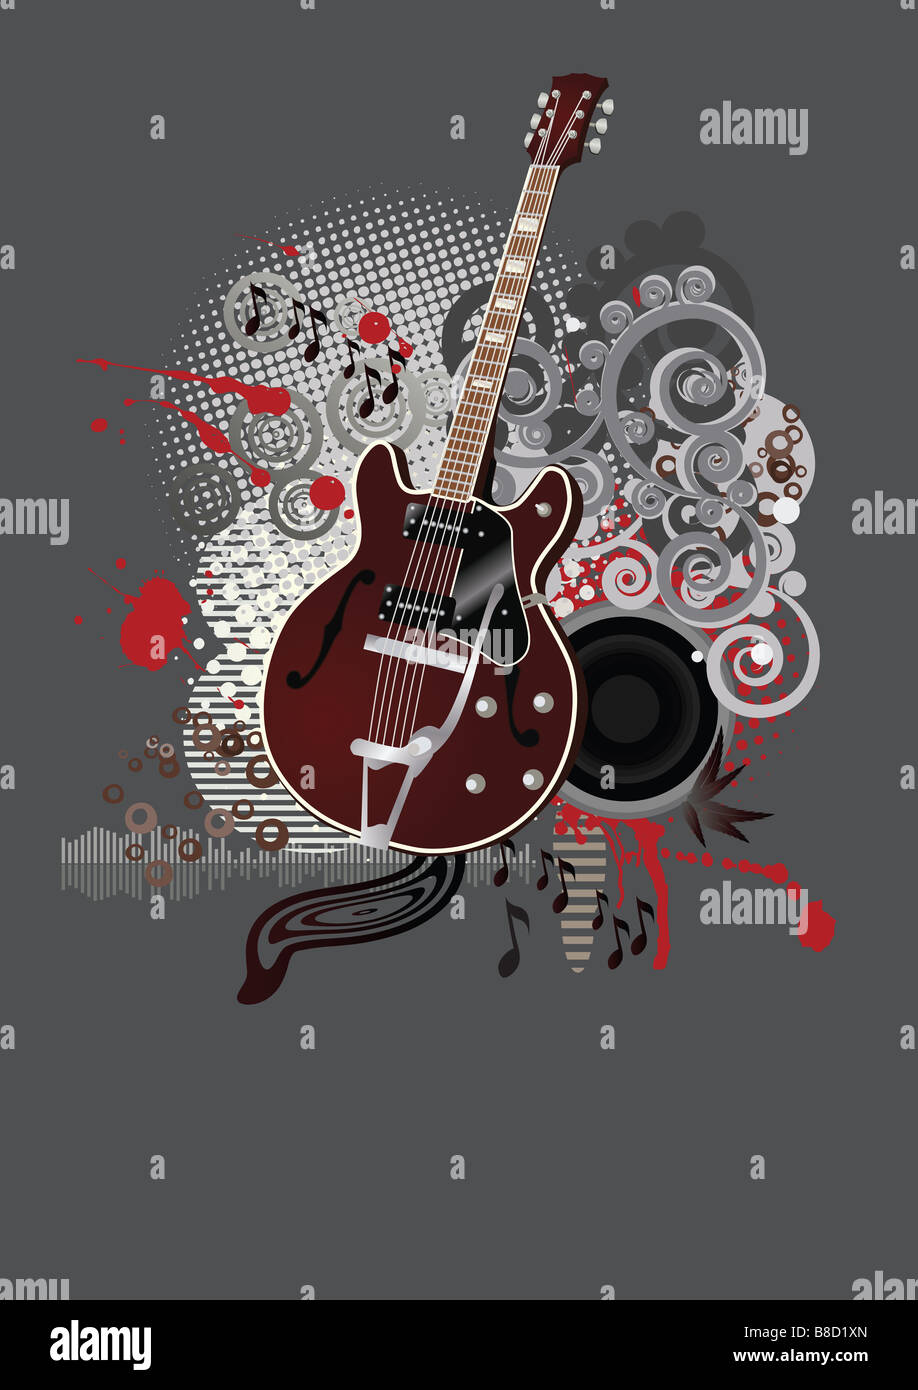 Abstract floral grunge guitar background Stock Photo